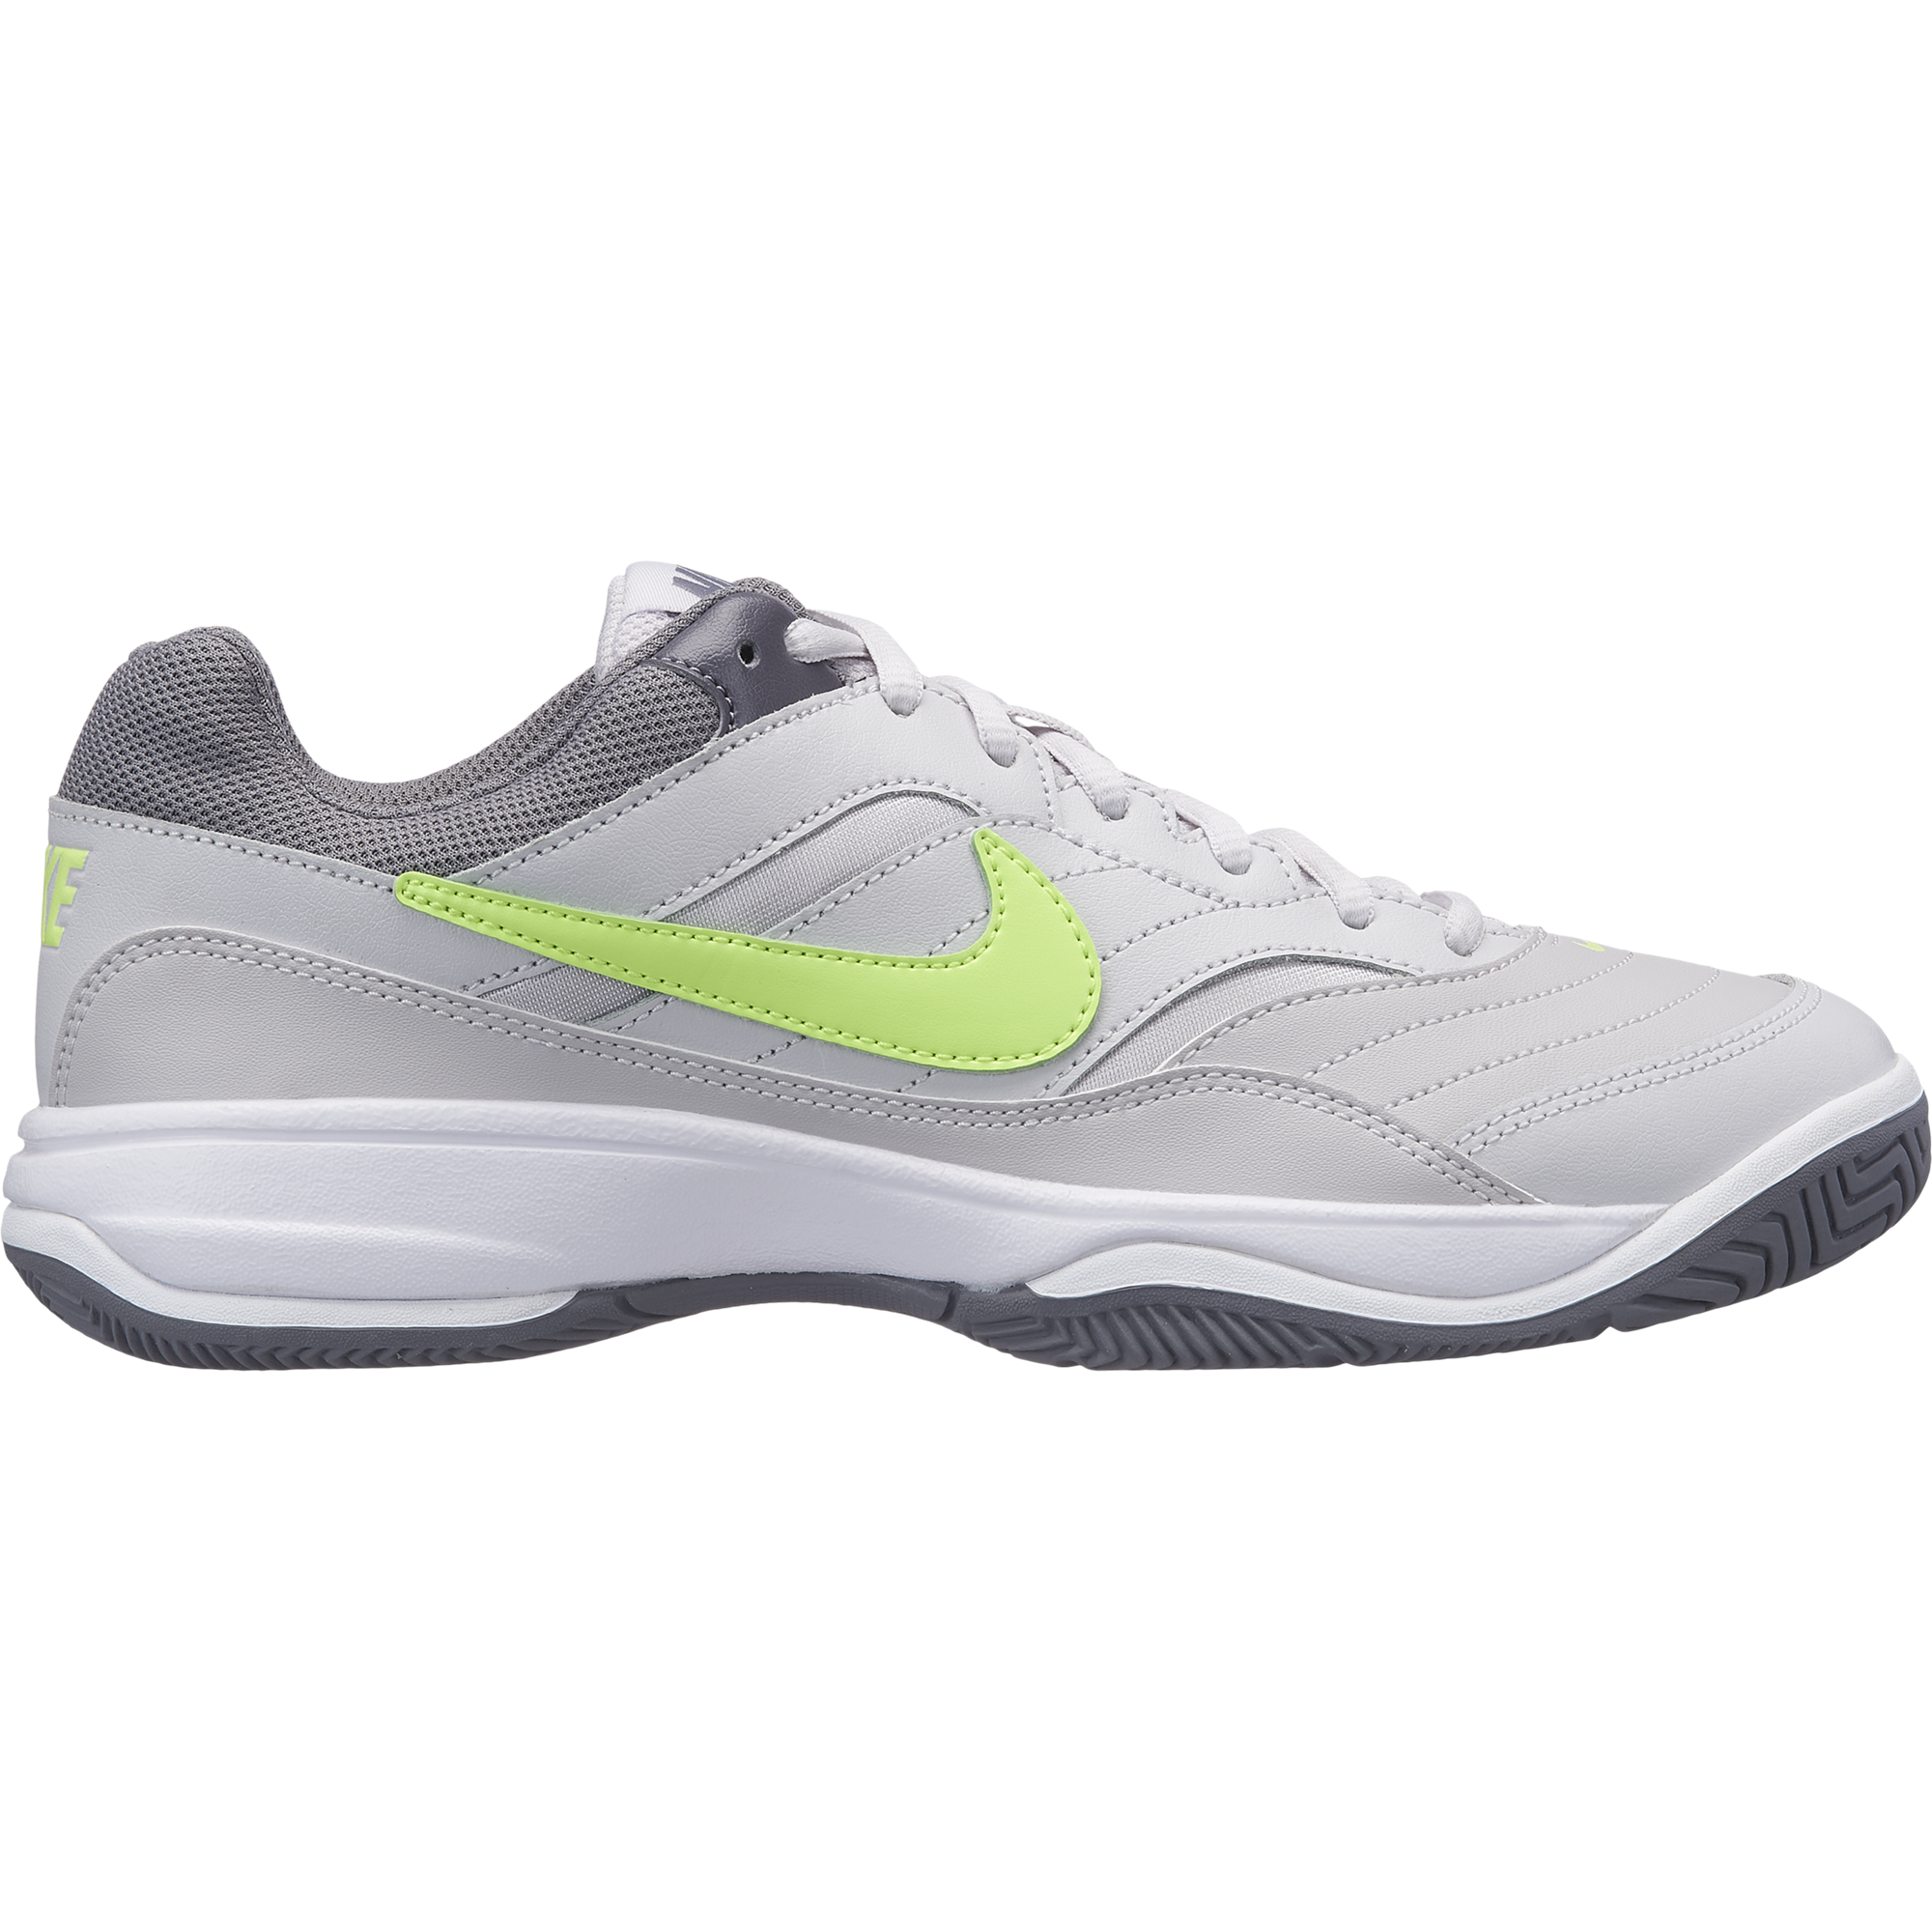 grey and green tennis shoes